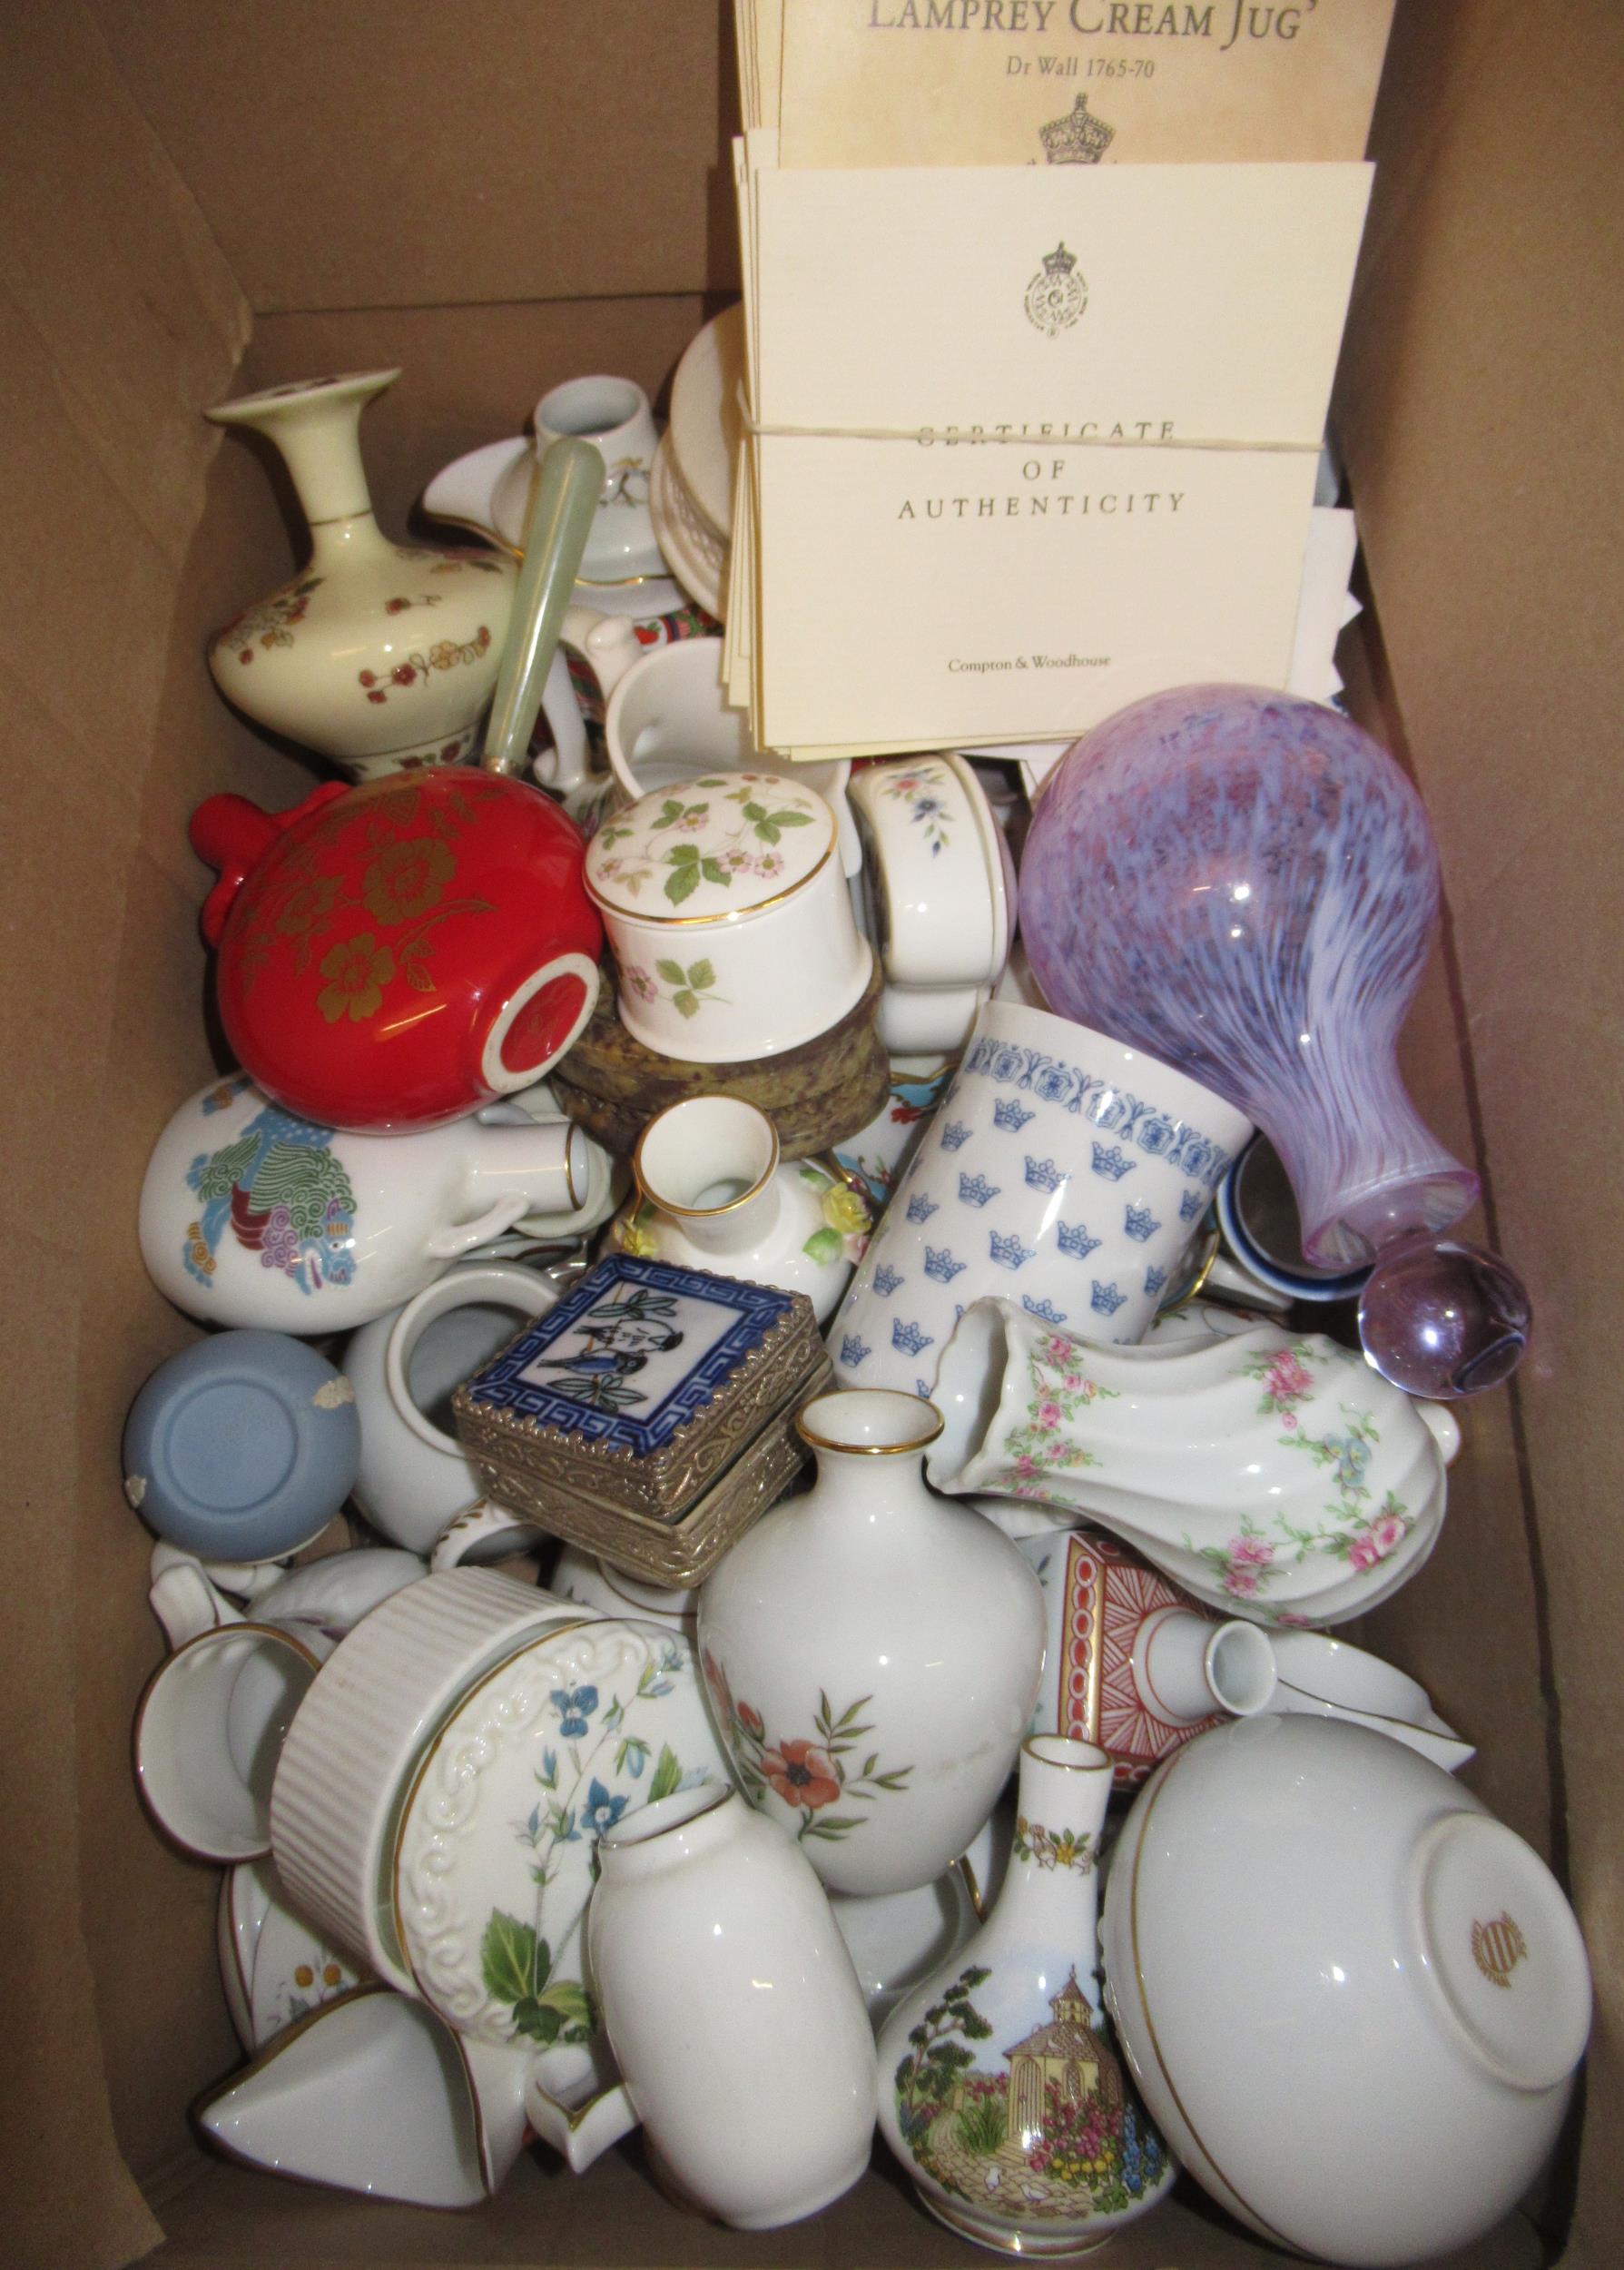 Collection of Royal Worcester small porcelain historic jugs, together with other small porcelain